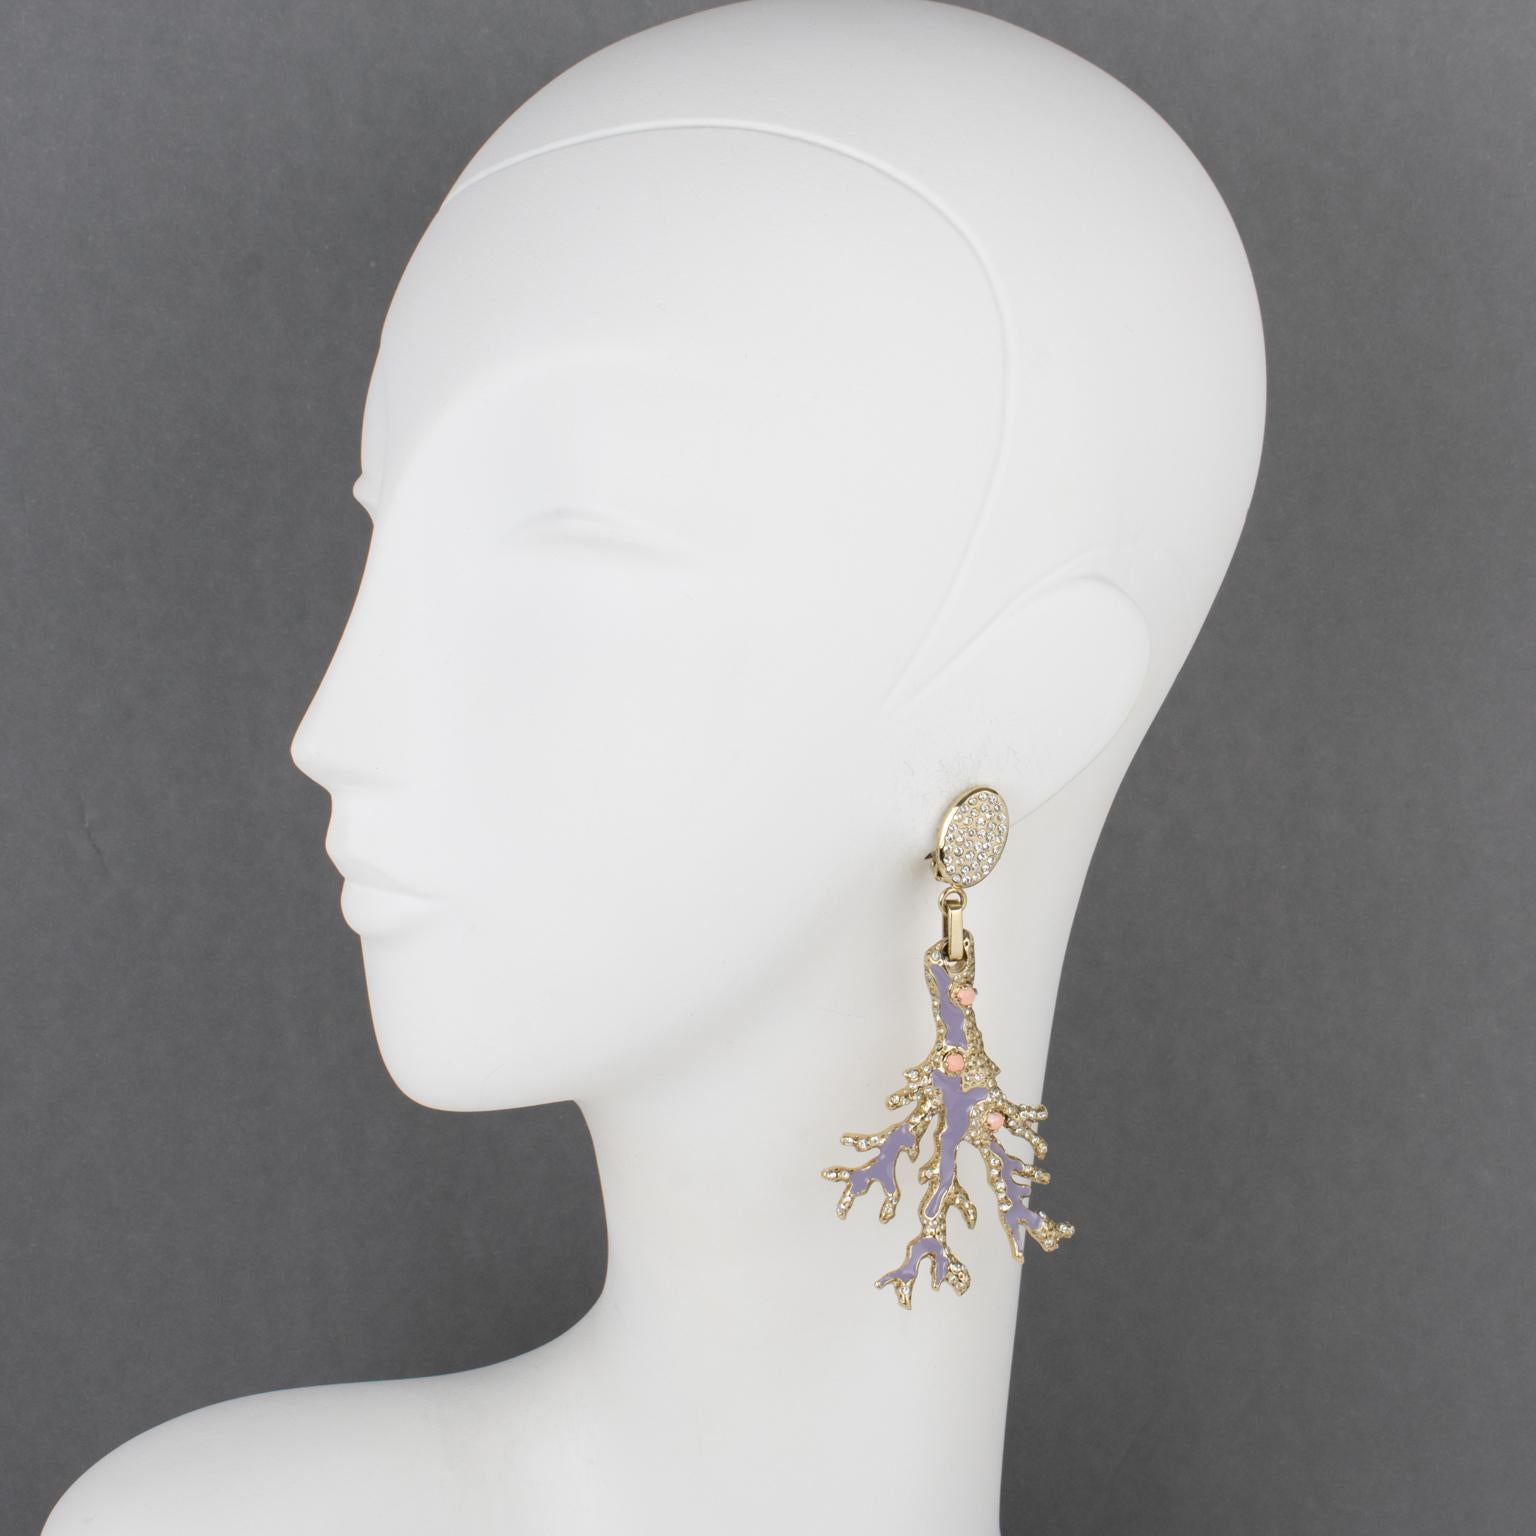 These mesmerizing Valentino Garavani jeweled clip-on earrings boast a pale gilded metal branch shape ornate with faux-coral glass rhinestone cabochons and purple lavender enamel. The fastenings of the earrings have an oval shape and are all covered